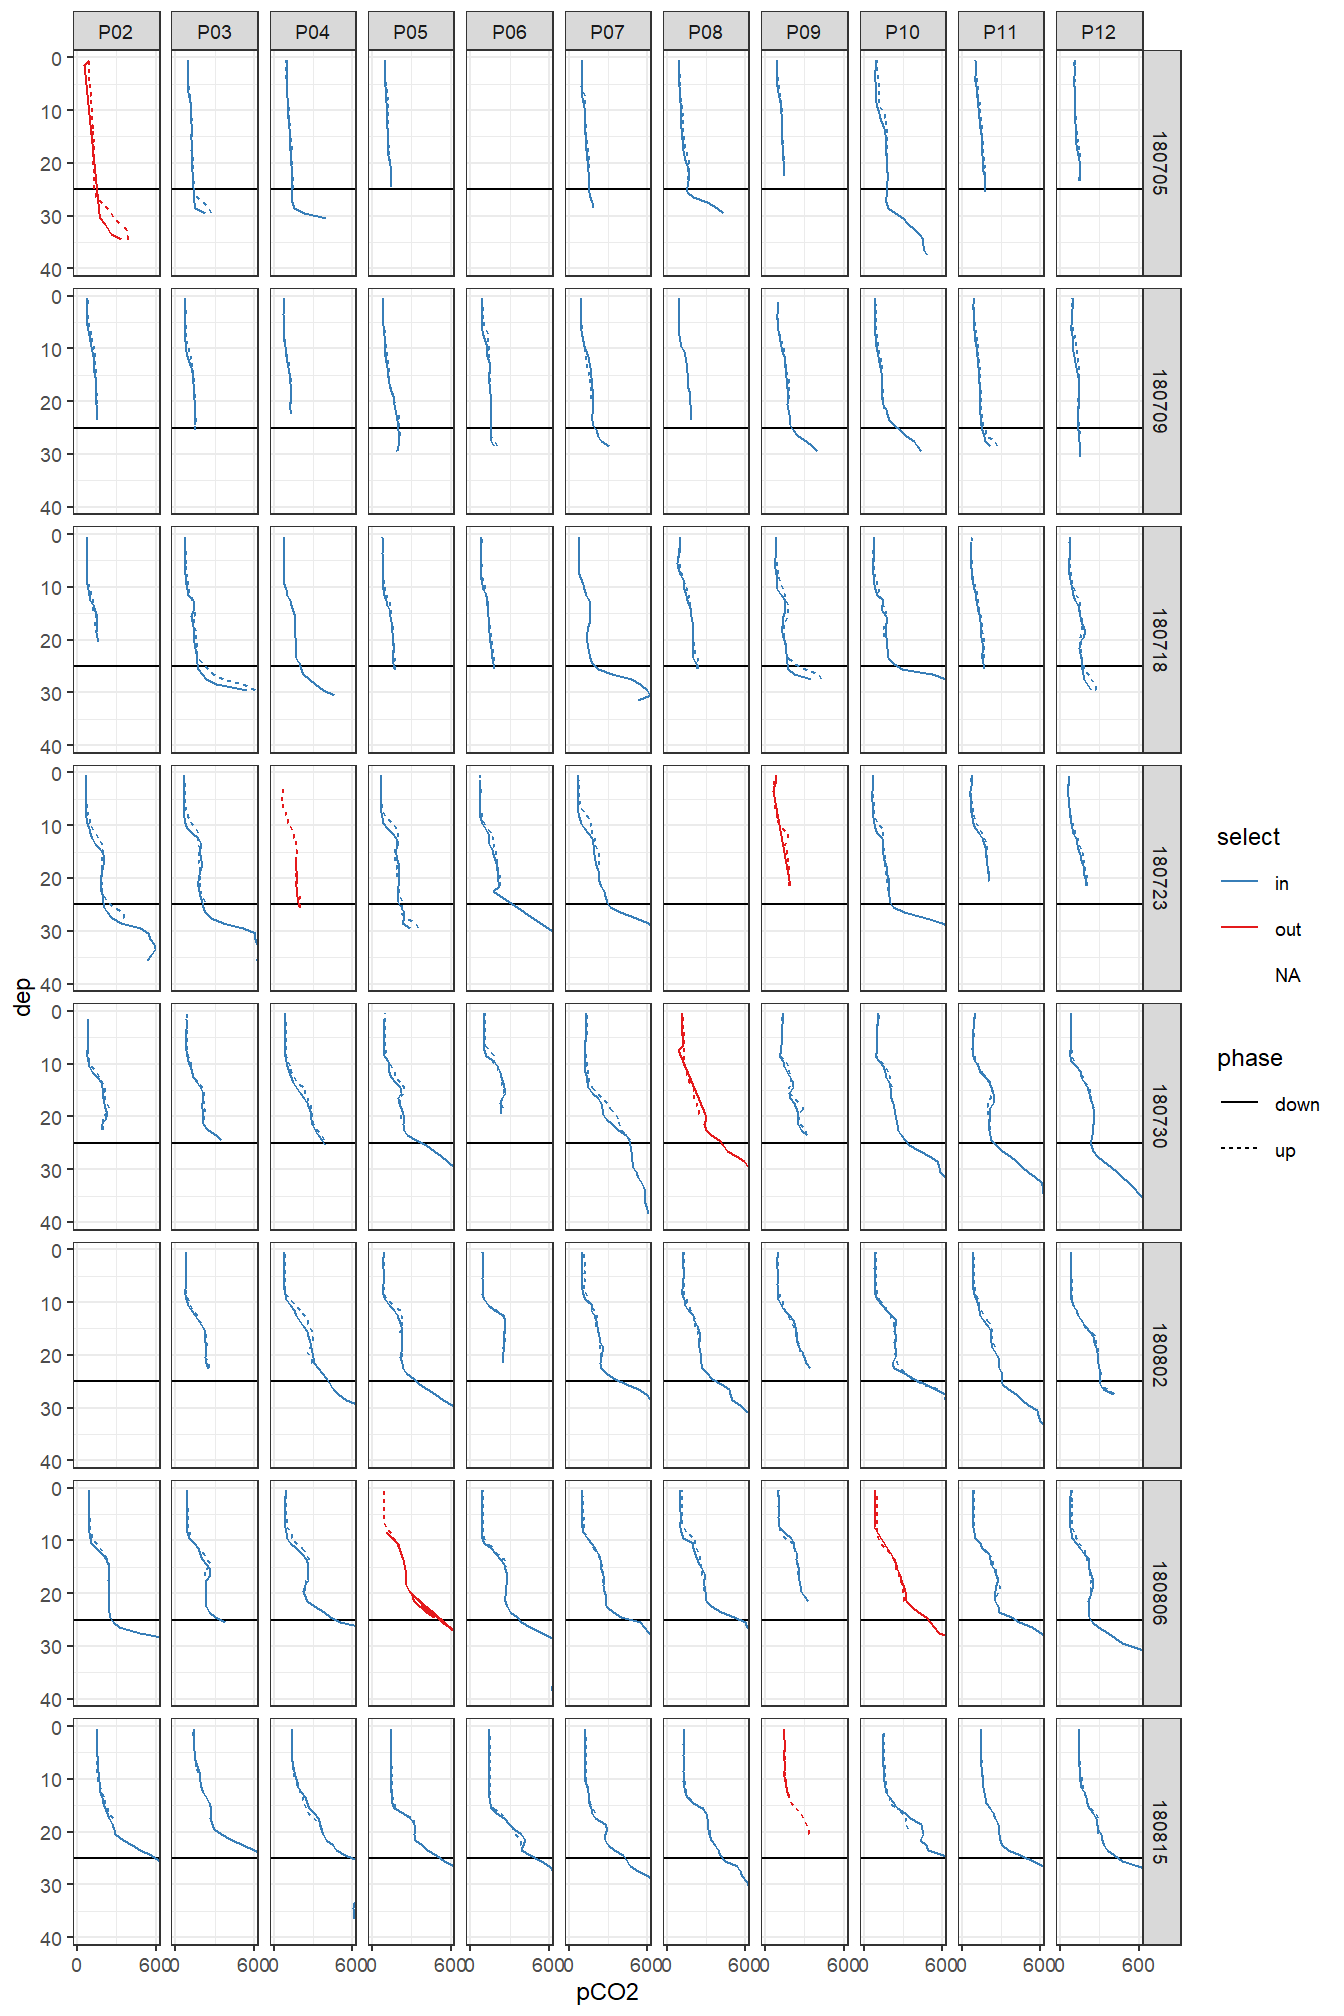 Overview pCO~2~ profiles at stations (P02-P12) and cruise dates (ID). y-axis restricted to displayed range.